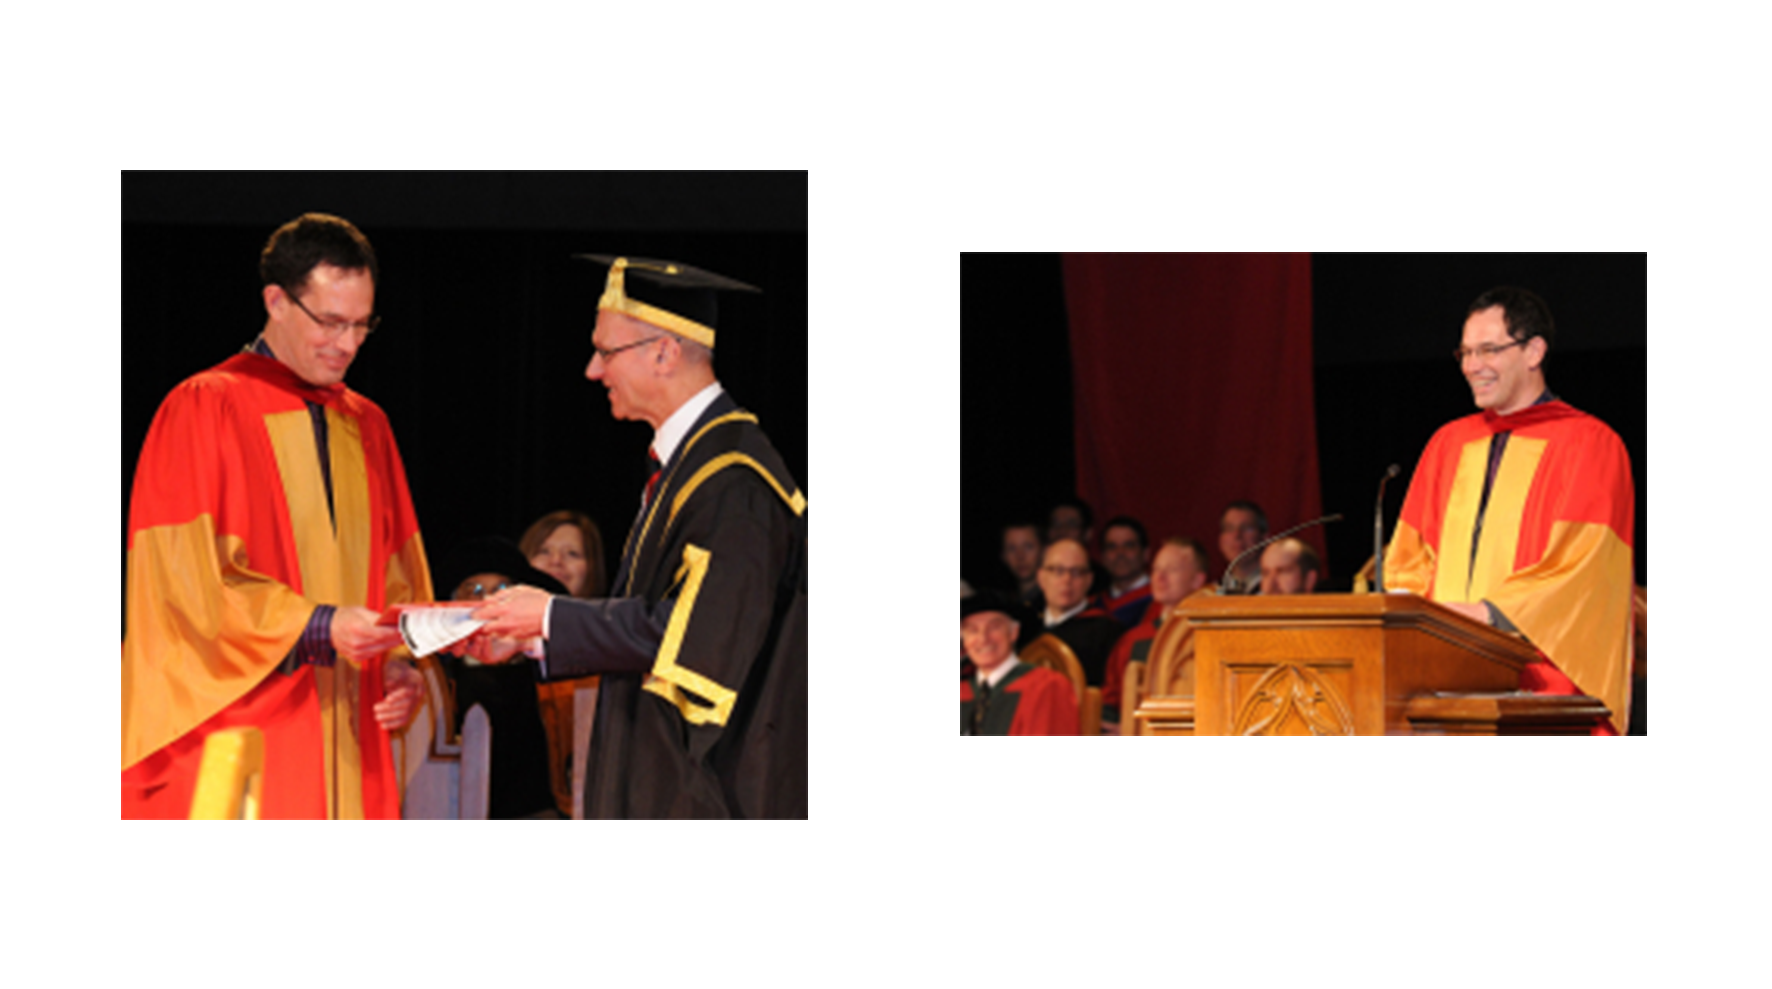 Pictures from Neil Turok's convocation address at University of Guelph